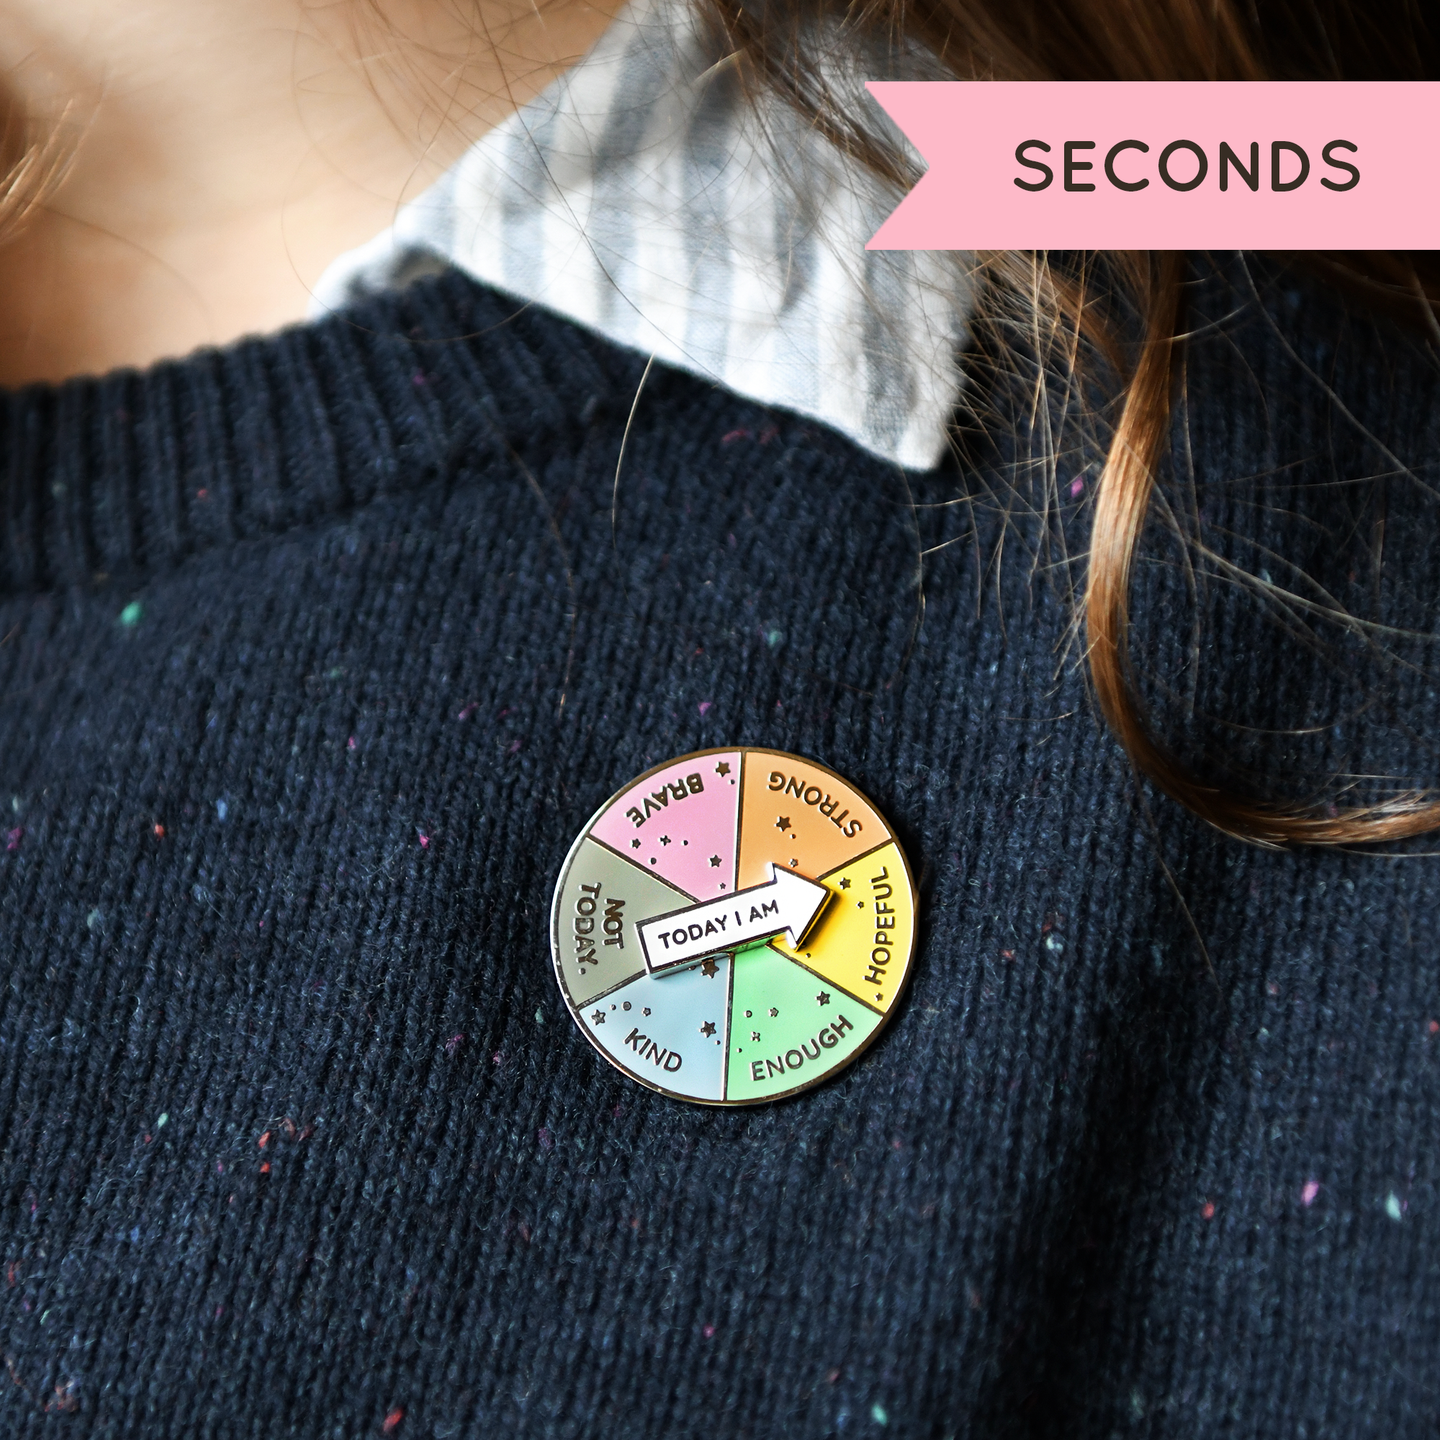 SECONDS / Spinning 'Today I Am' Enamel Pin Badge